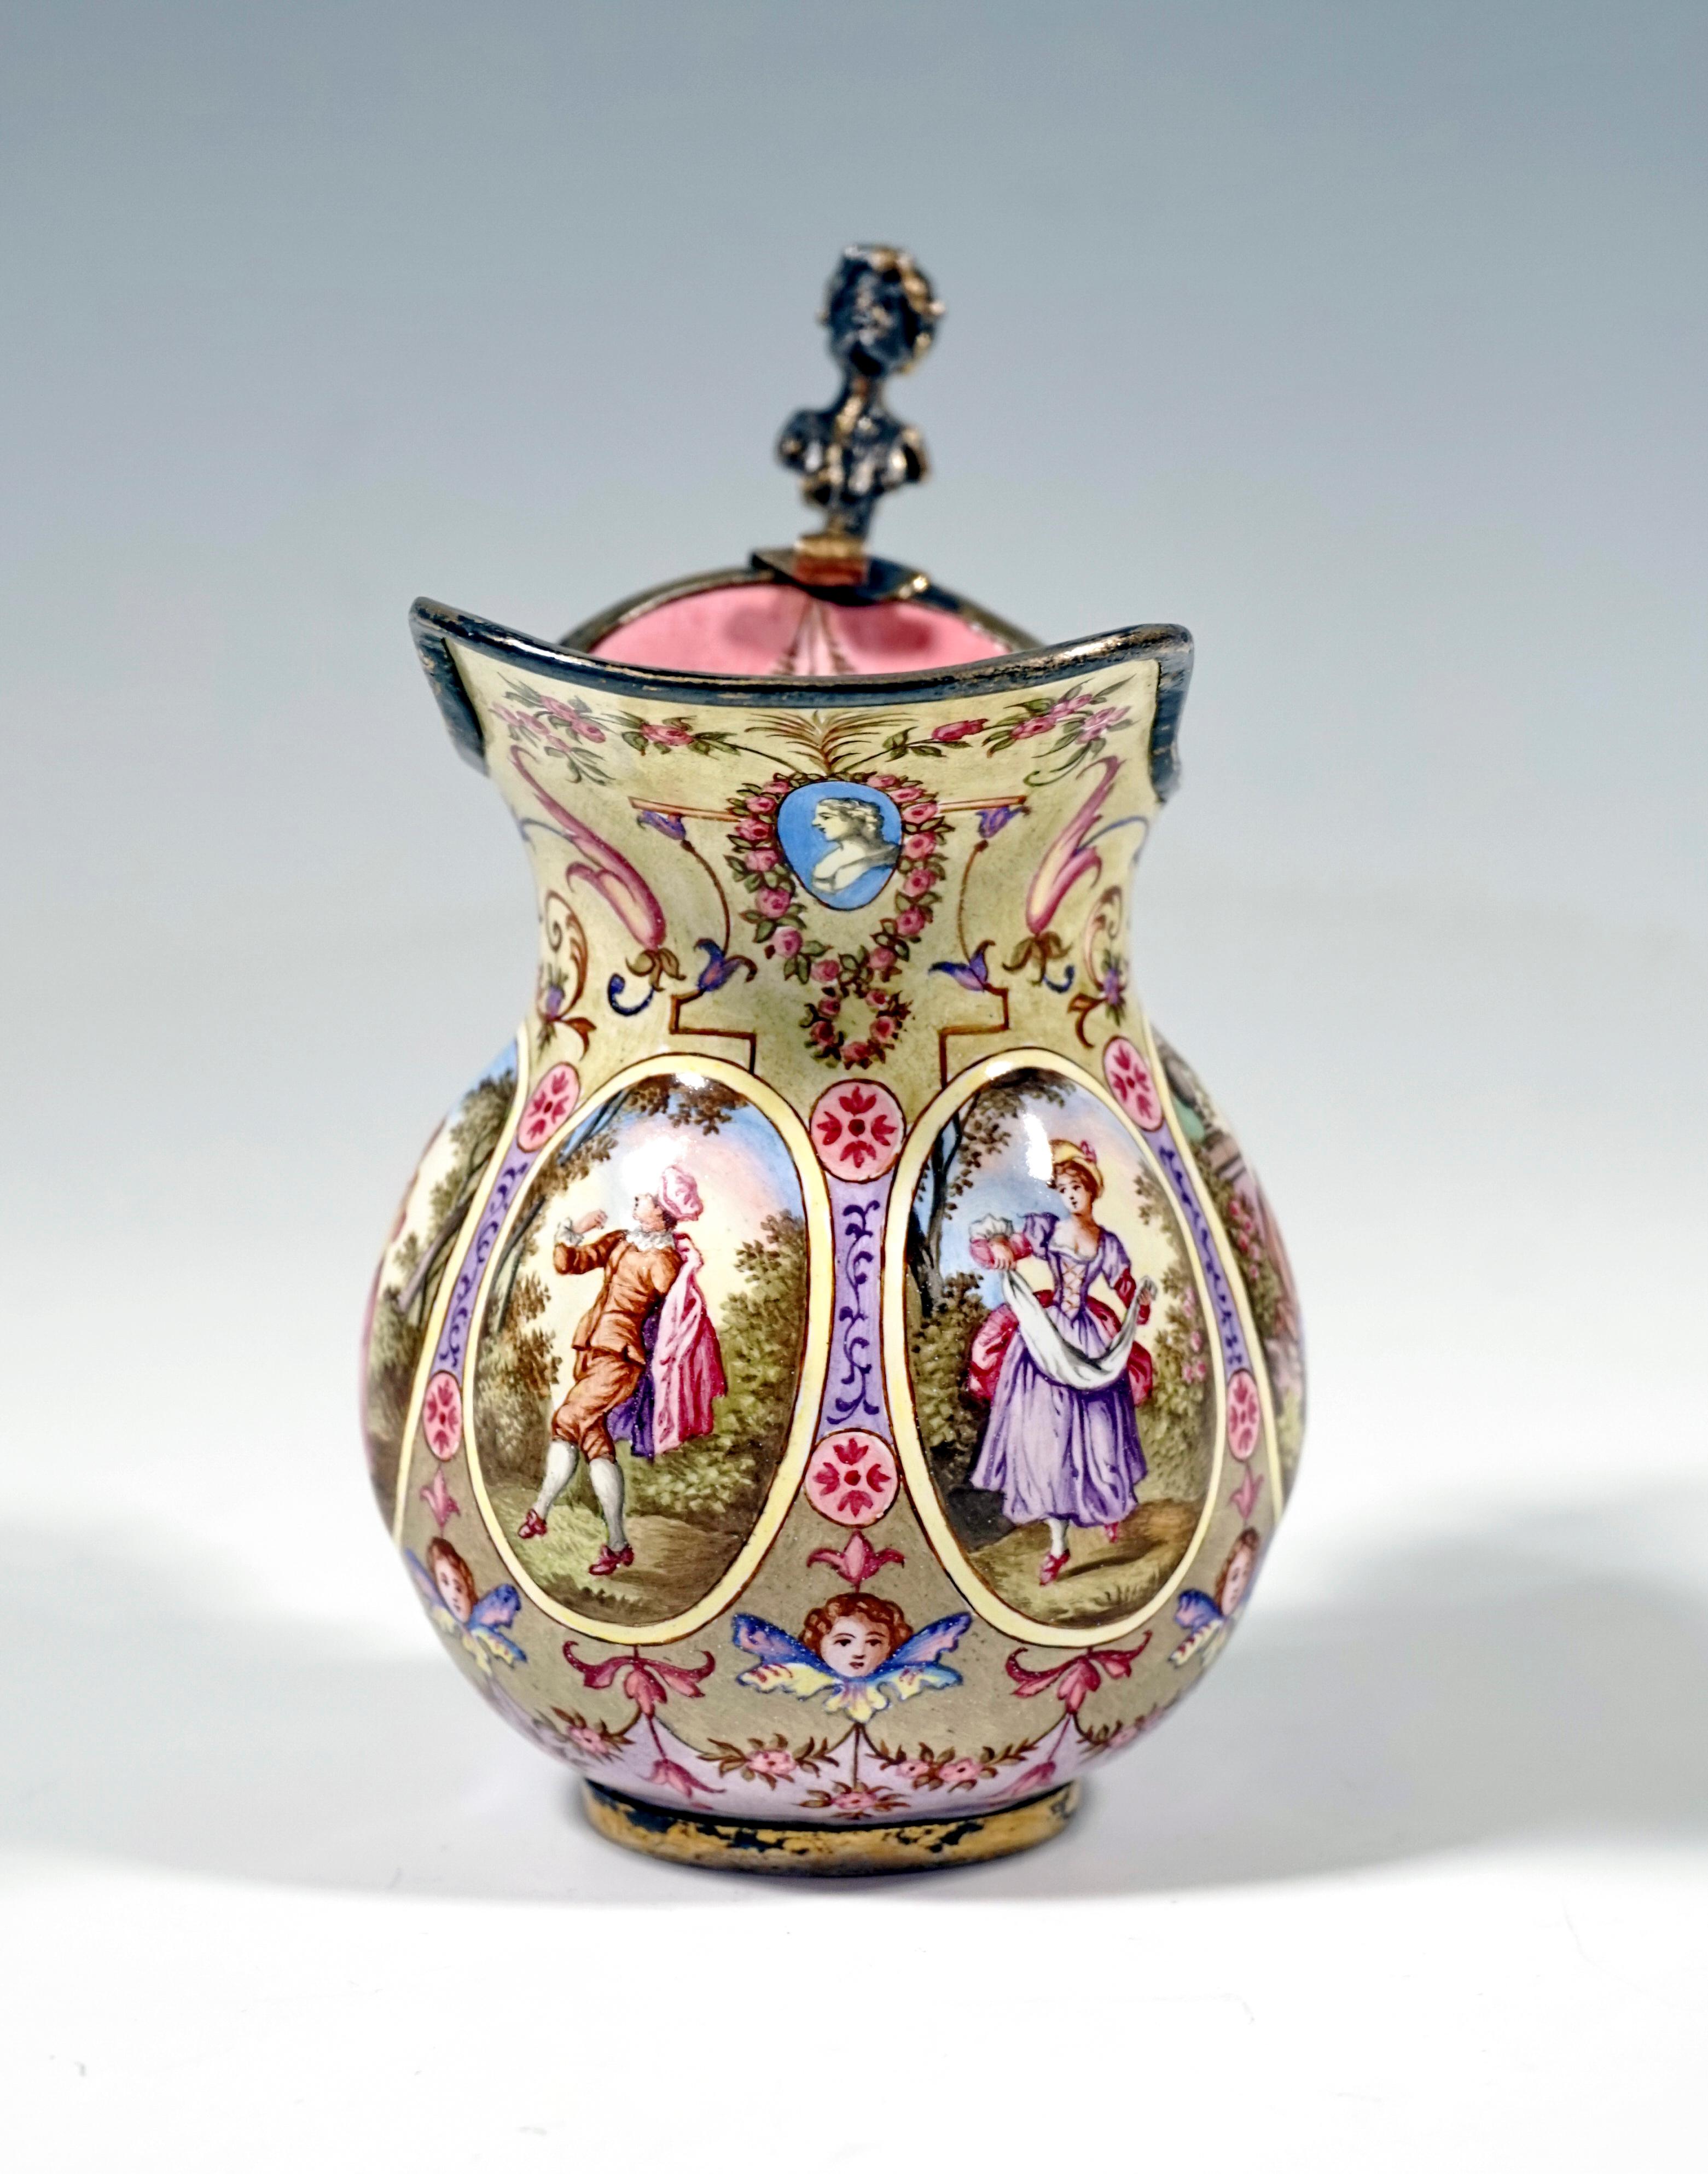 Finest Viennese Enamel Work from around 1880:
Metal body almost completely enamelled, belly with six oval, outwardly curved medallions with Watteau scenes, in between and on the spout detailed arabesque decoration with angel heads, inside flower